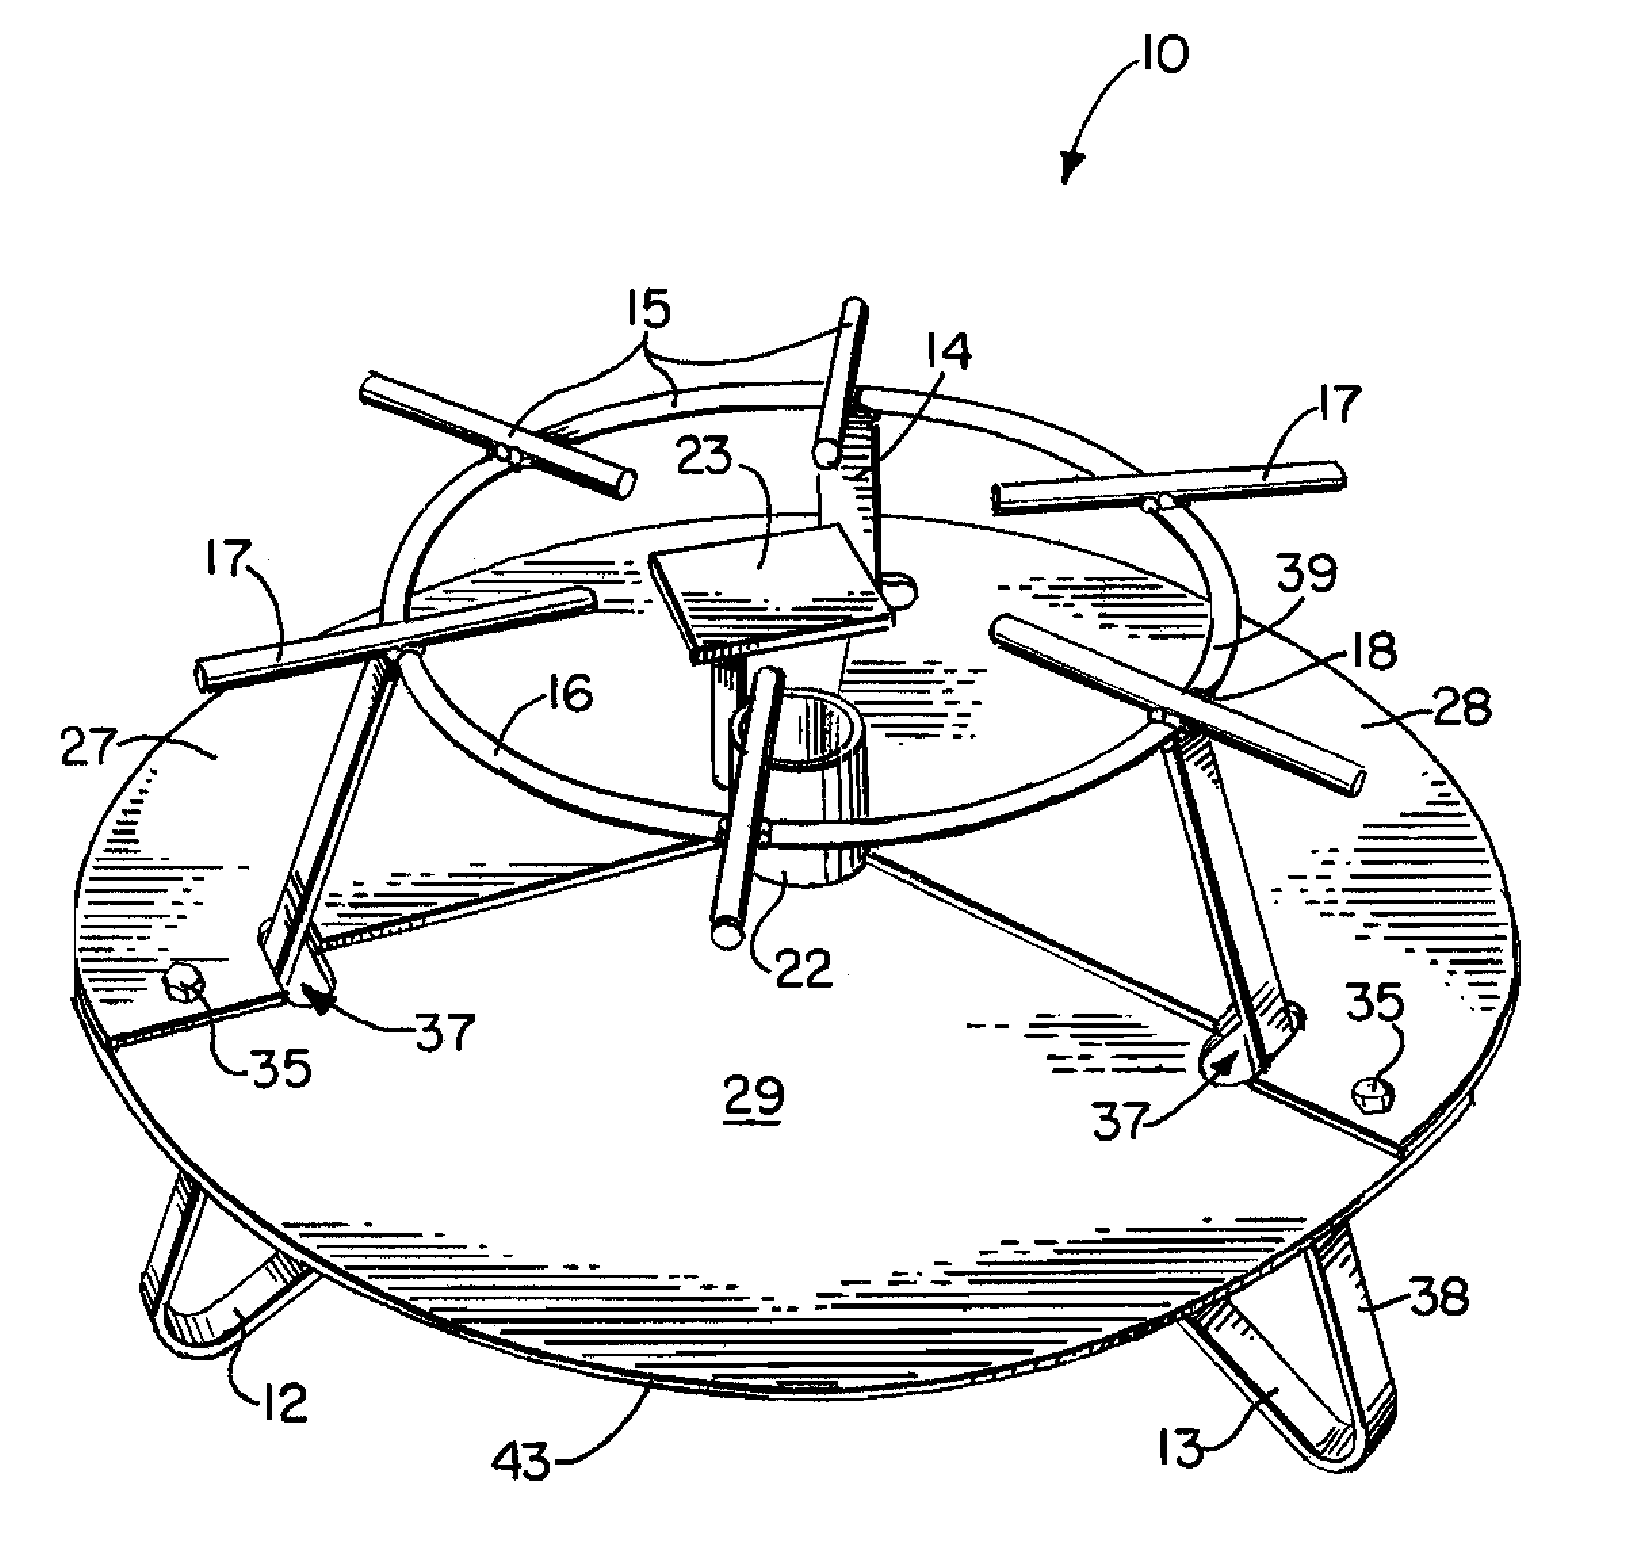 Outdoor cooking apparatus with removable heat shield